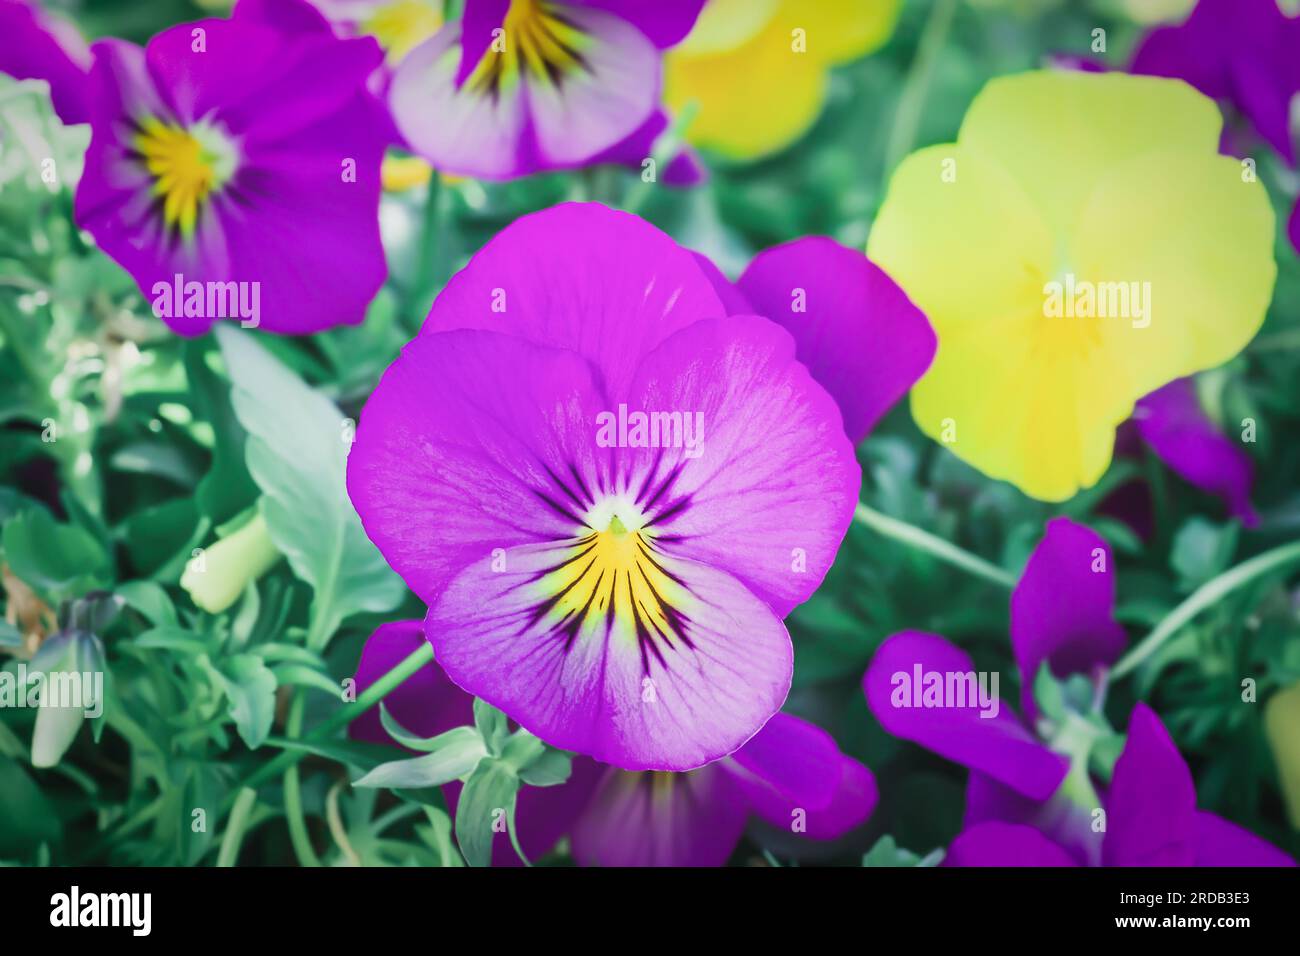 Purple pansy growing on flower bed closeup. Violet pansies flowers grow in spring ornamental garden. Blooming Viola wirttrockiana plants at sun light Stock Photo